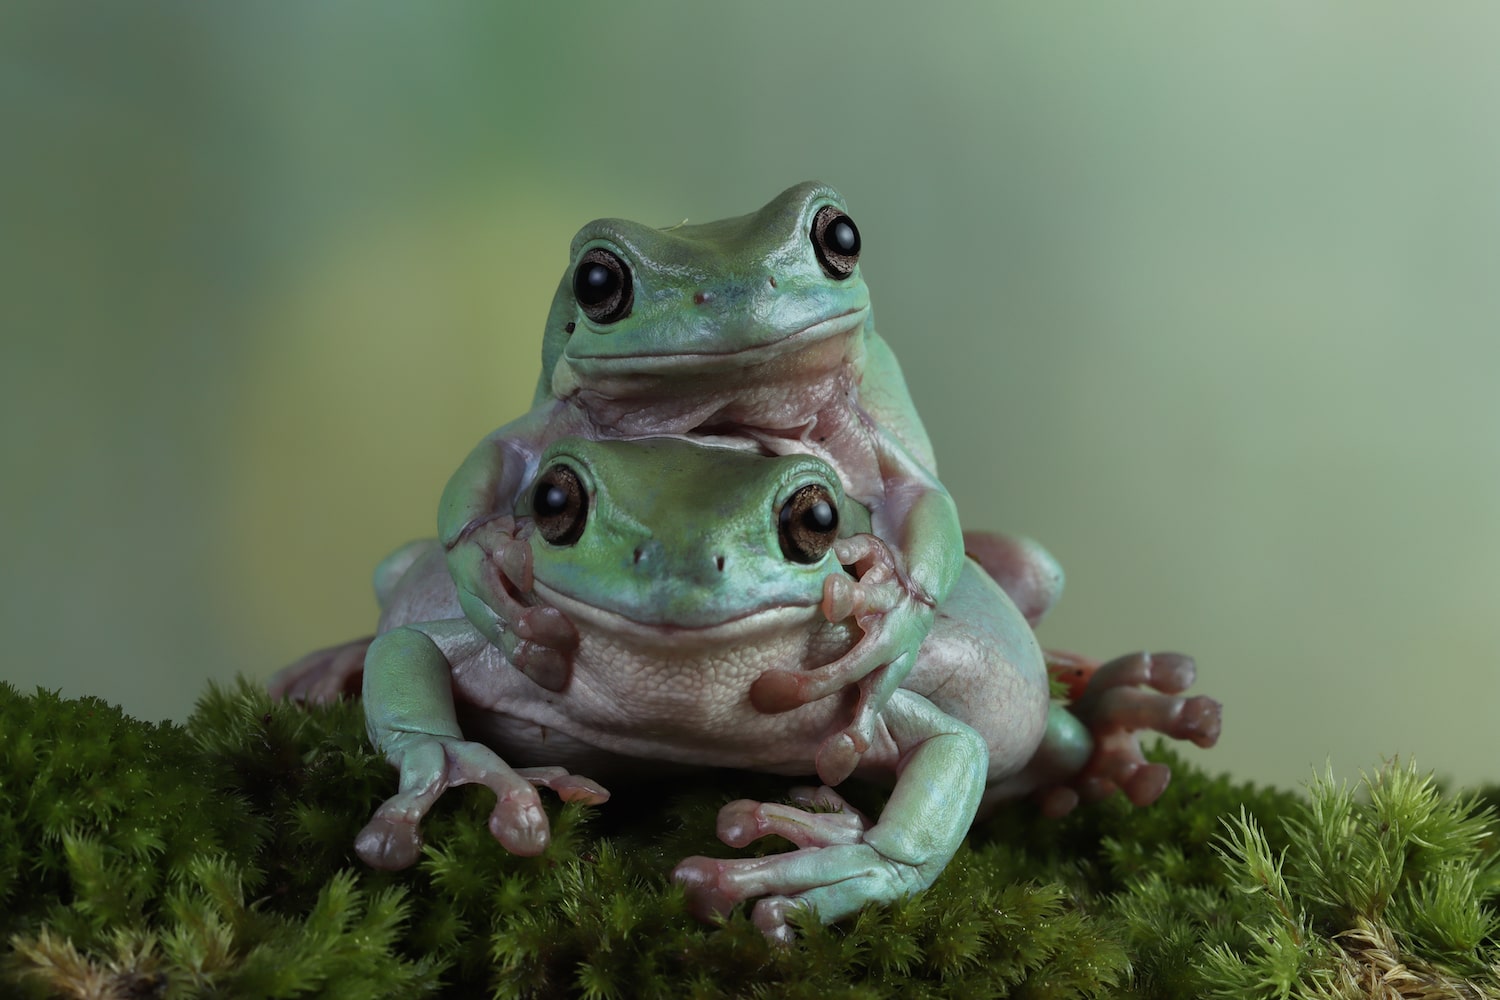 two adorable Litoria caerulea tree frogs that are a light green color sit nestled on top of each other on moss and branches